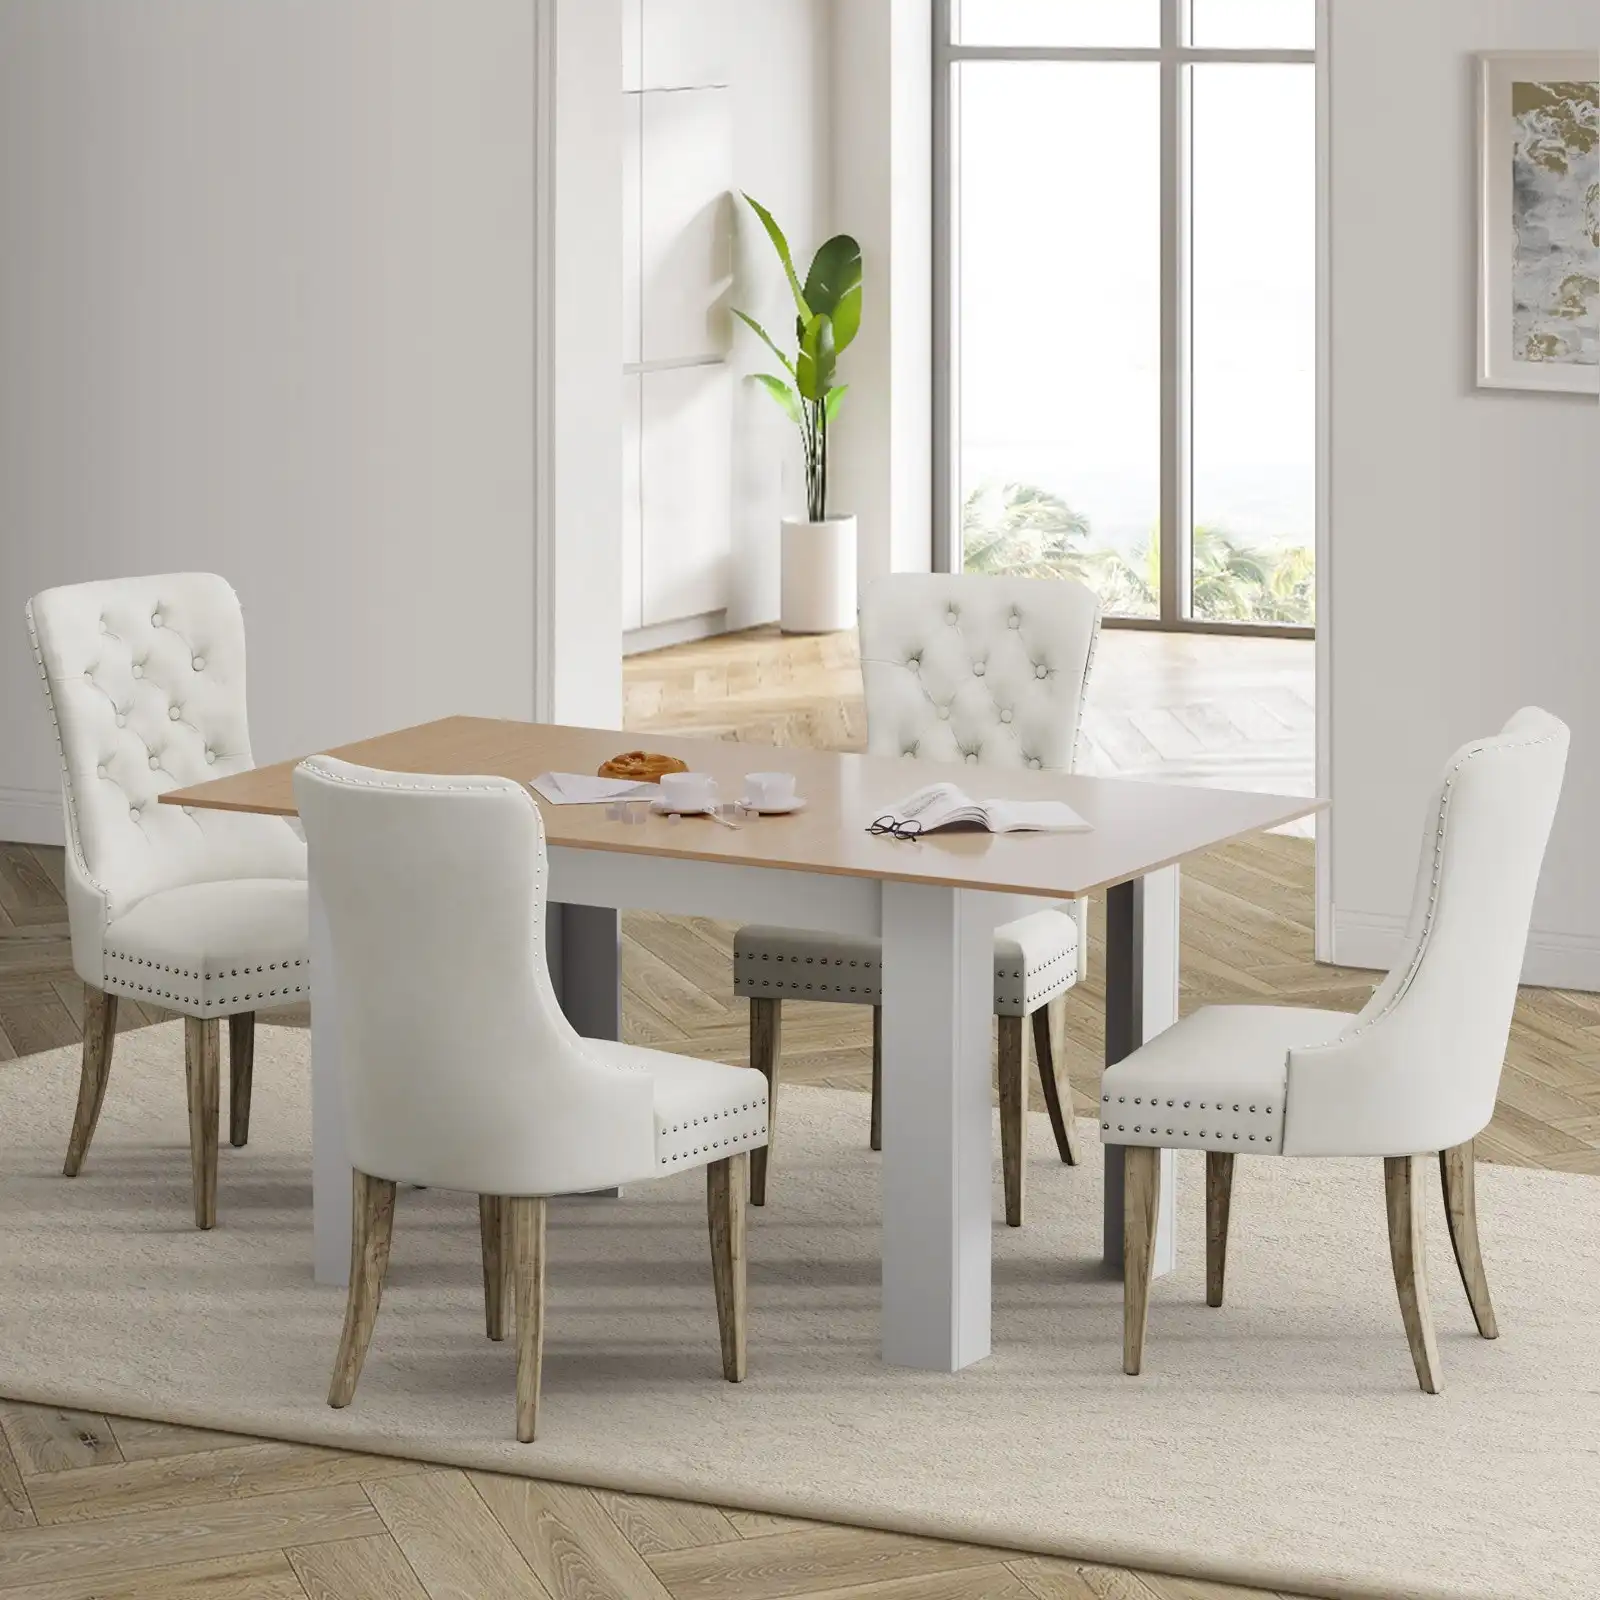 Oikiture 160cm Extendable Dining Table with 4PCS Dining Chairs Velvet Beige